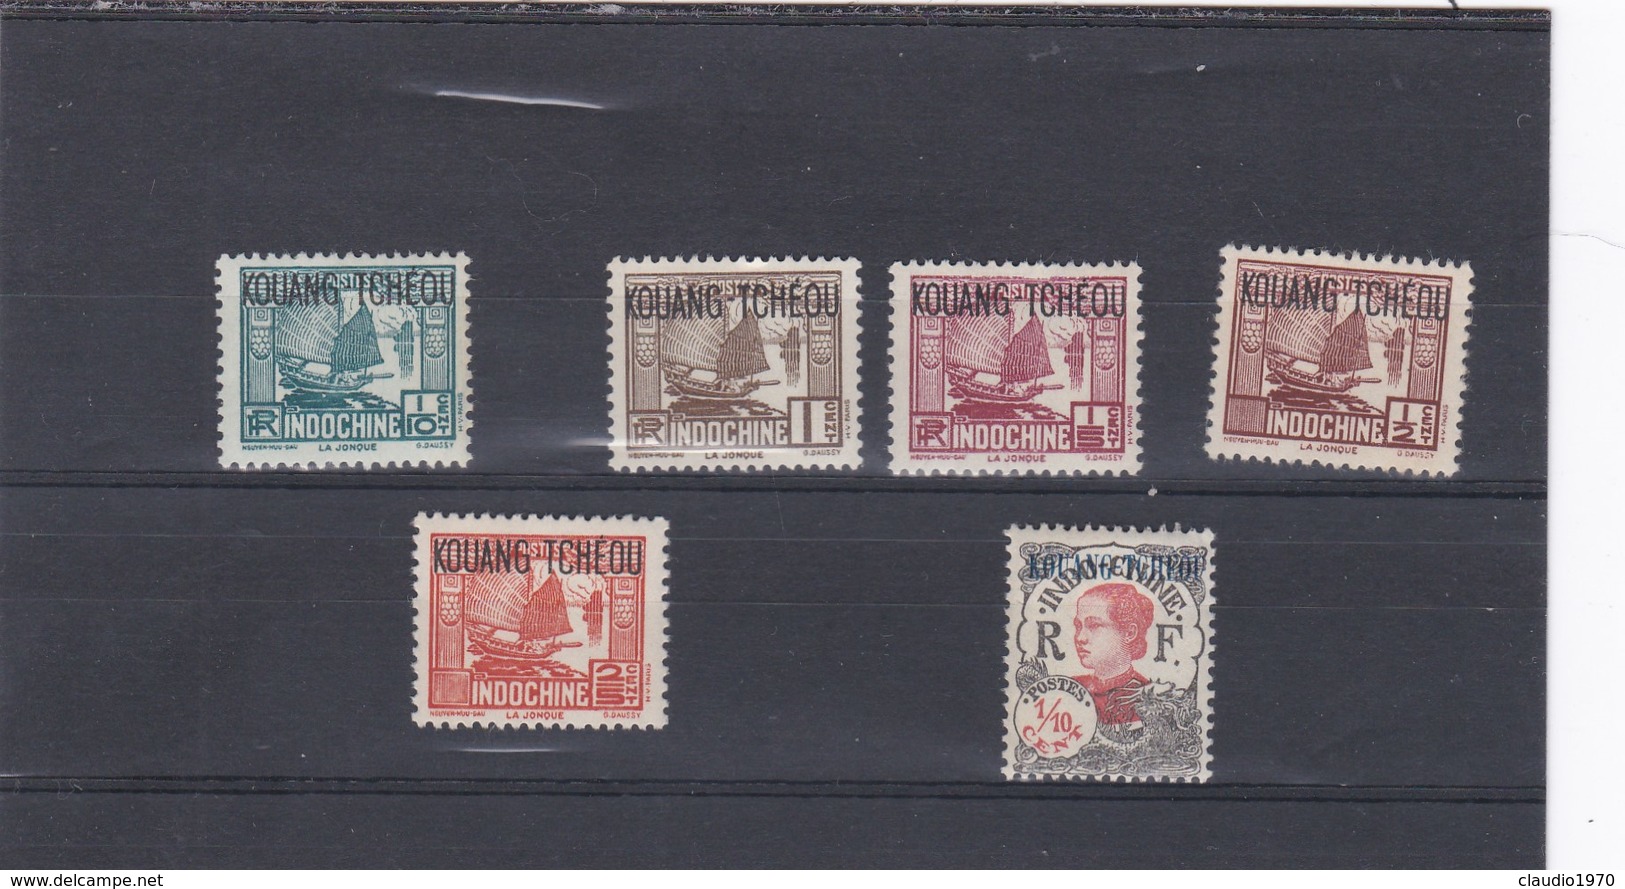 INDOCHINE - KOUANG TCHEOU  LOTTO DI 6 FRANCOBOLLI. - Used Stamps